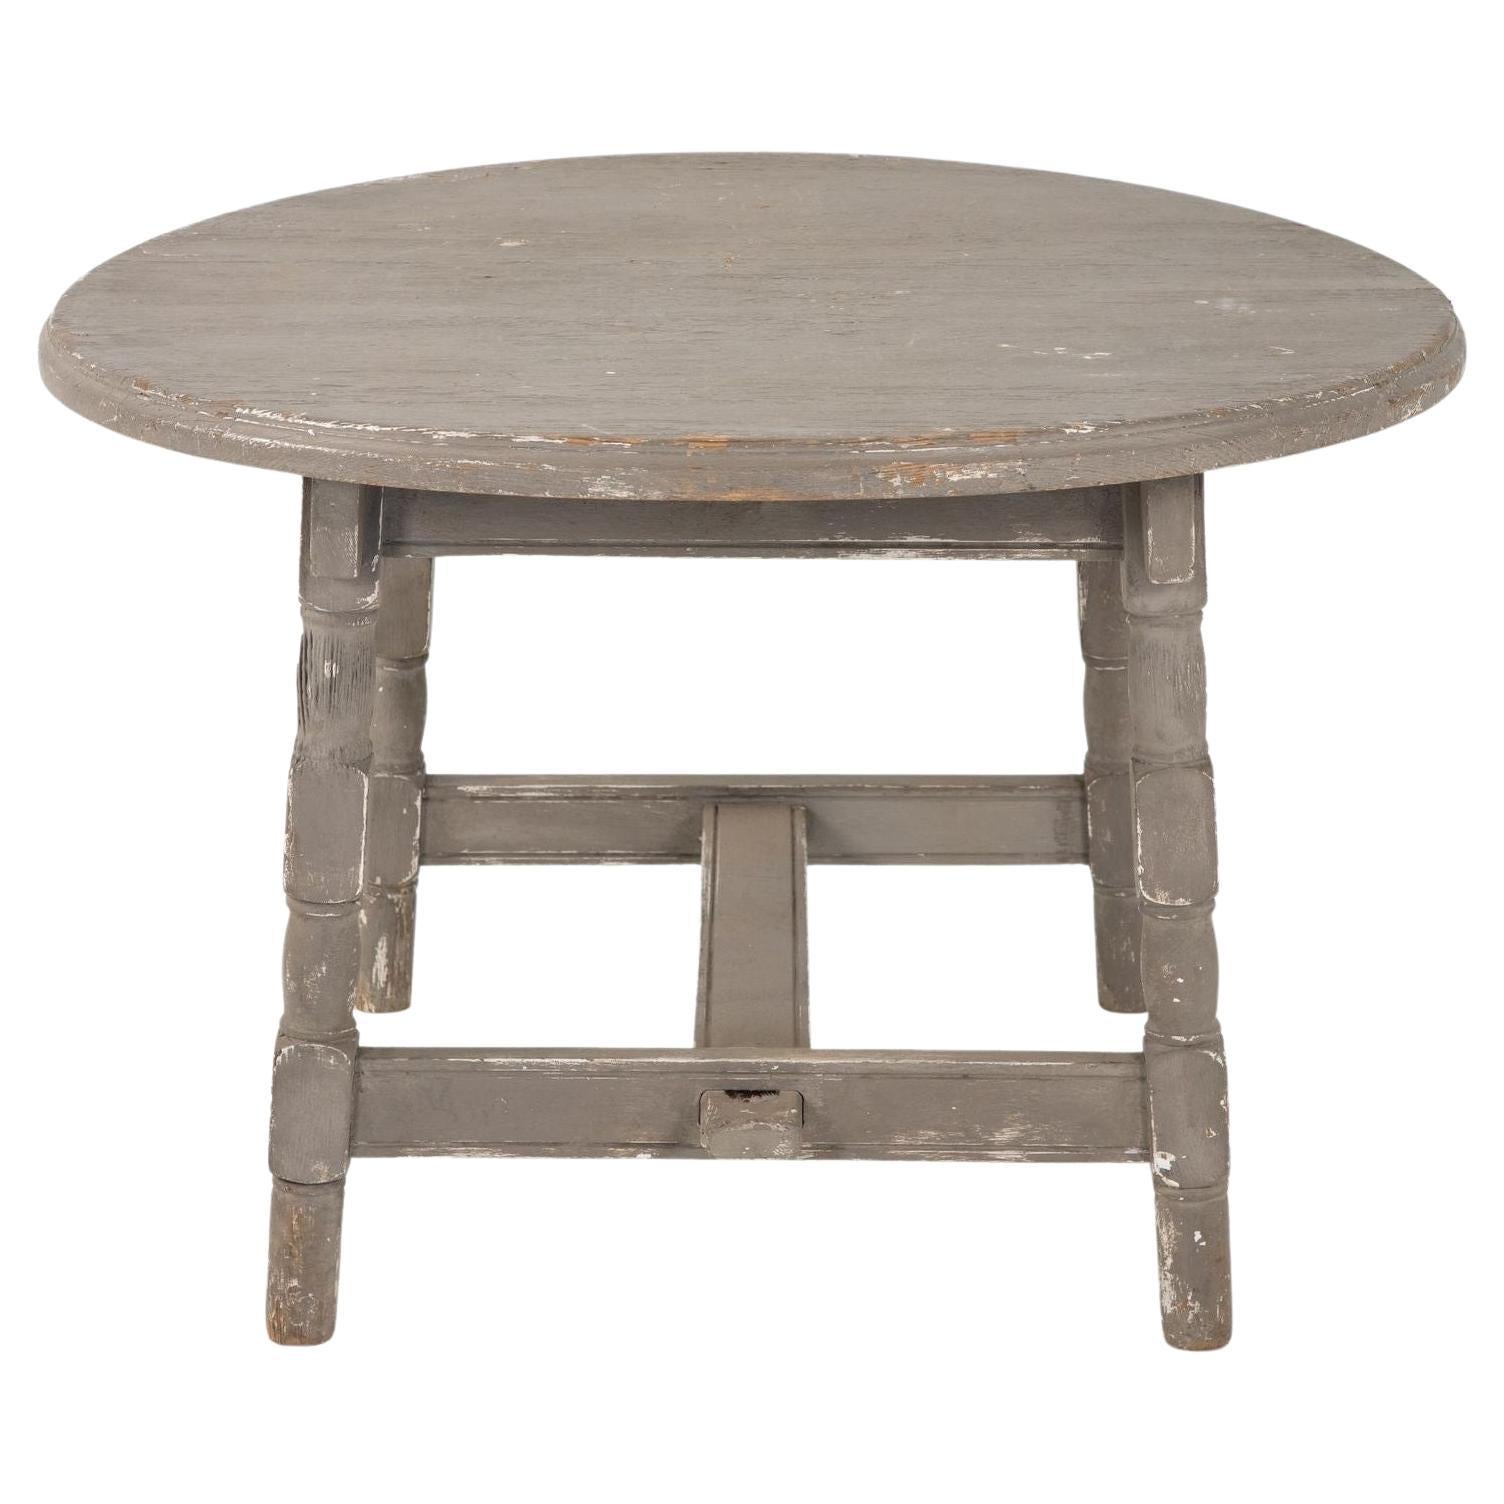 Early 20th Century Painted Grey Low Table